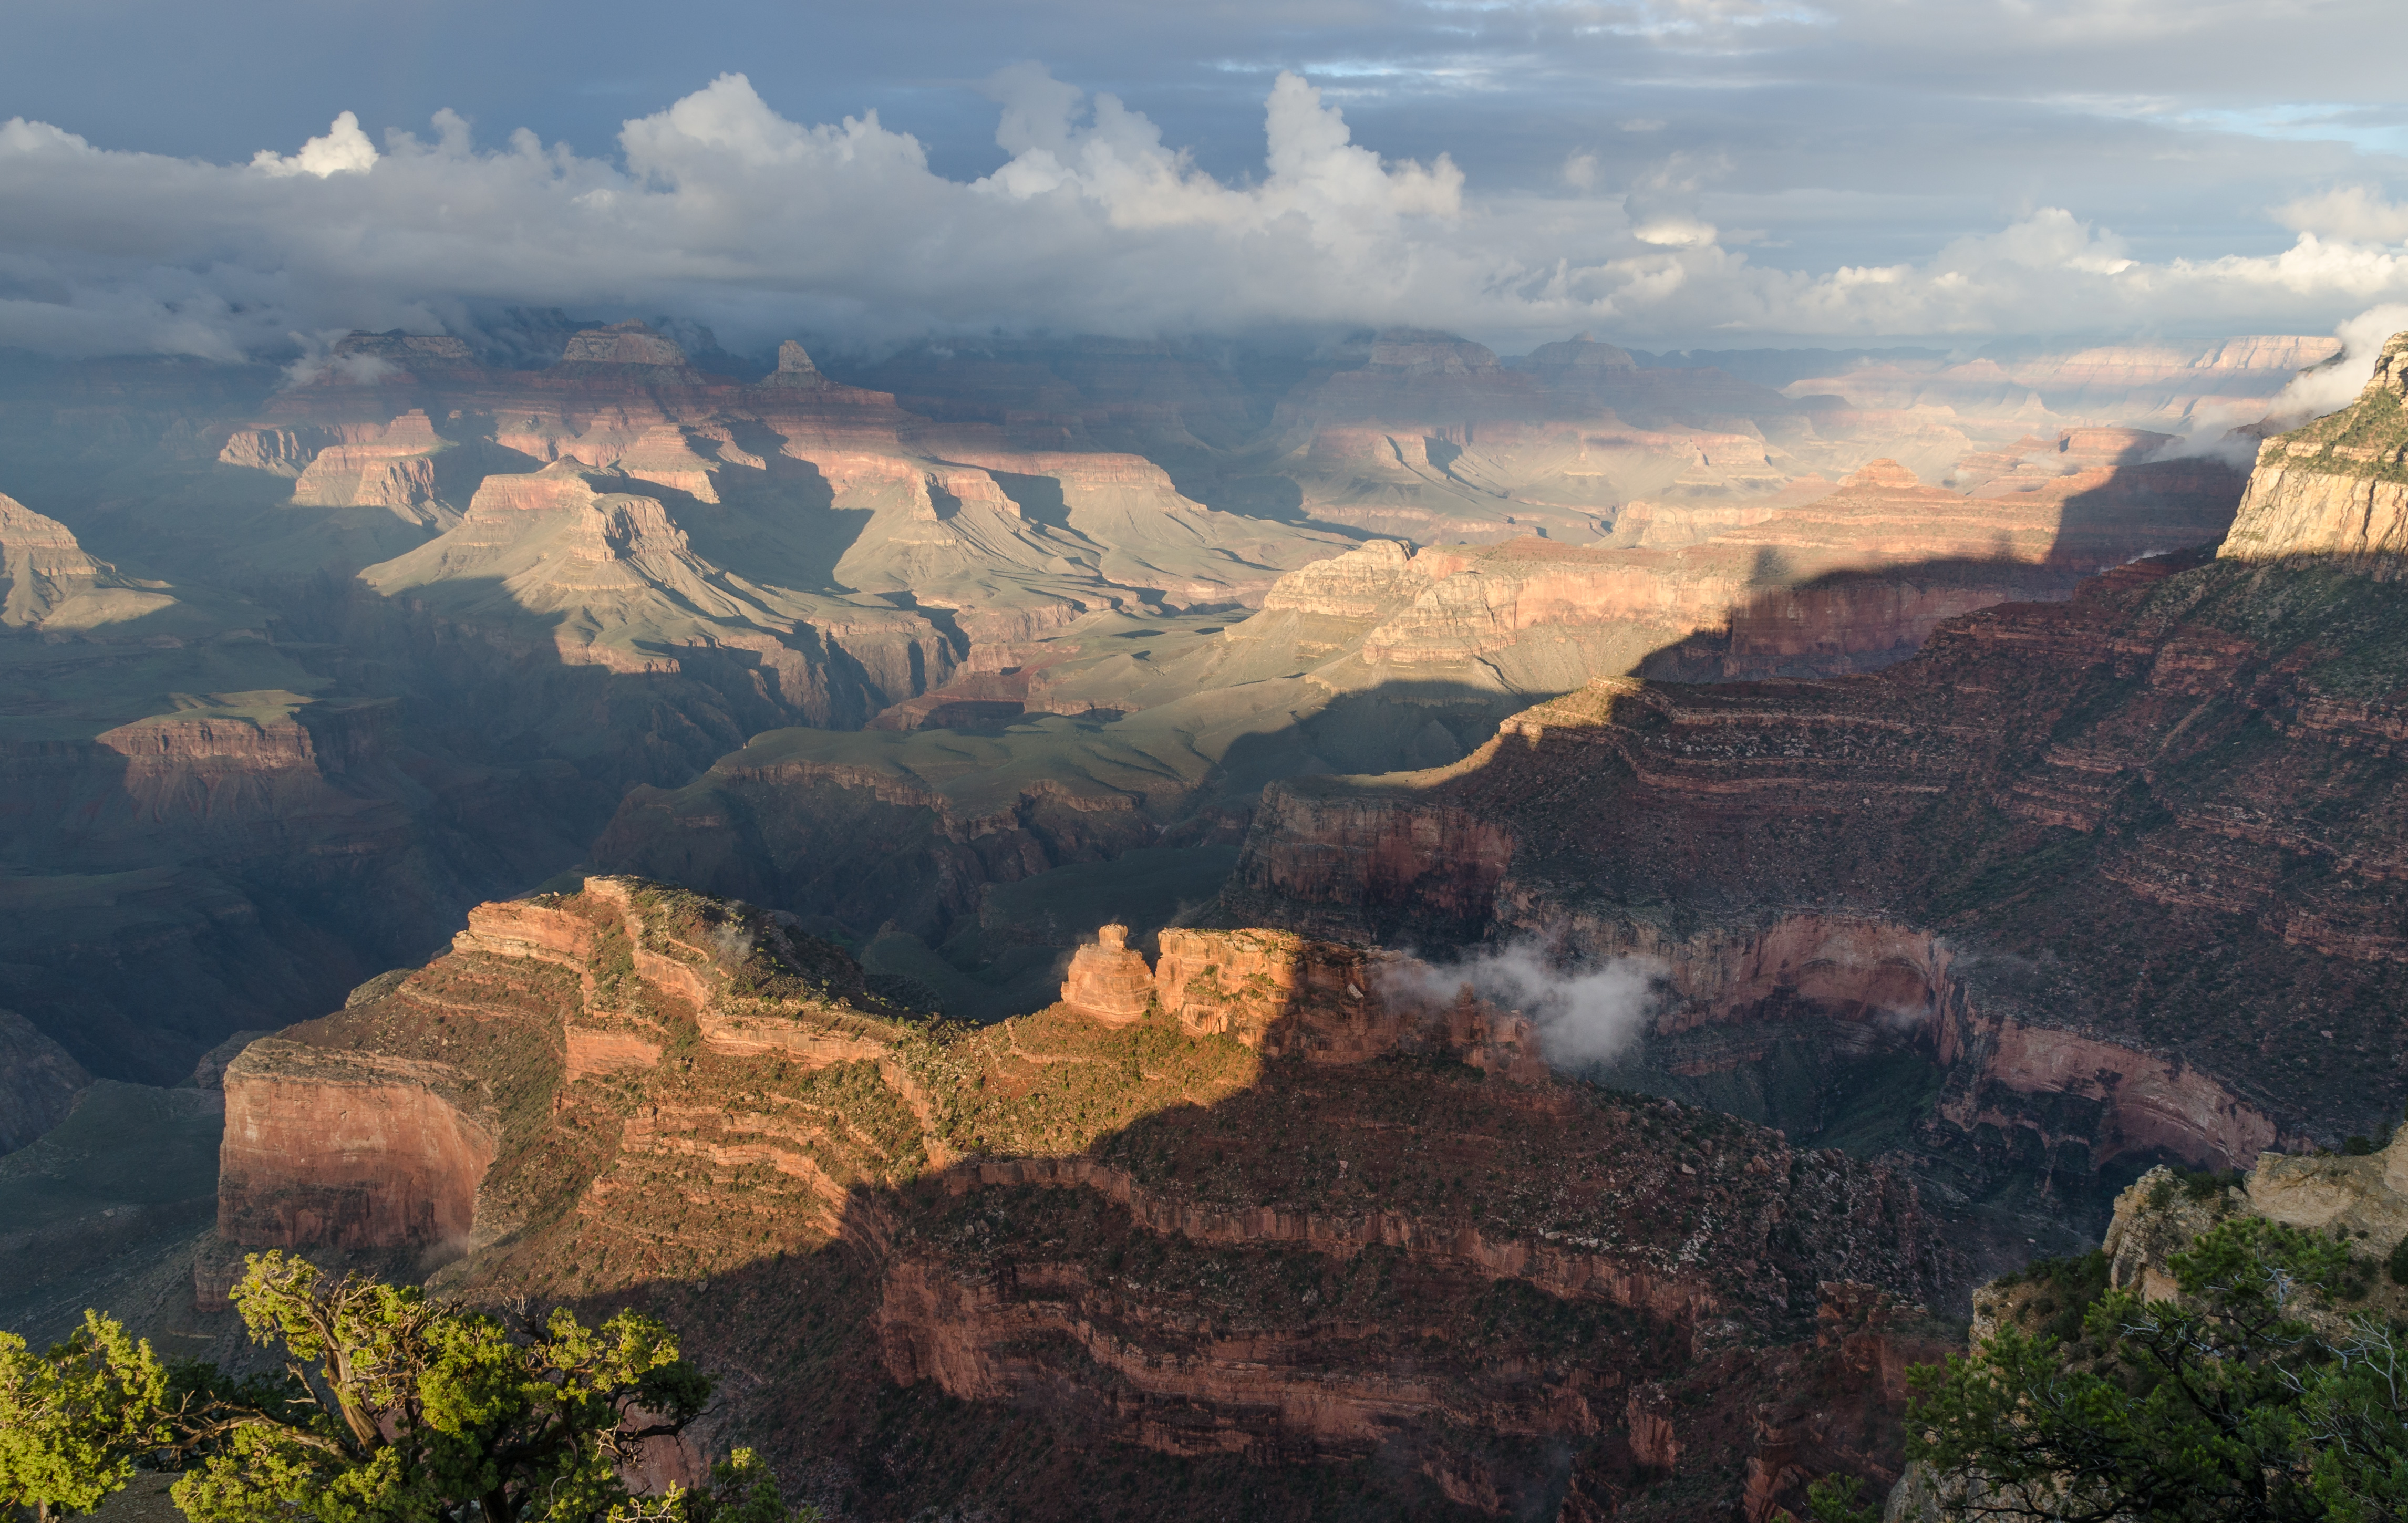 Grand Canyon South Rim photographed from Powell Point with warm evening light at 18:11 on September 8, 2013.